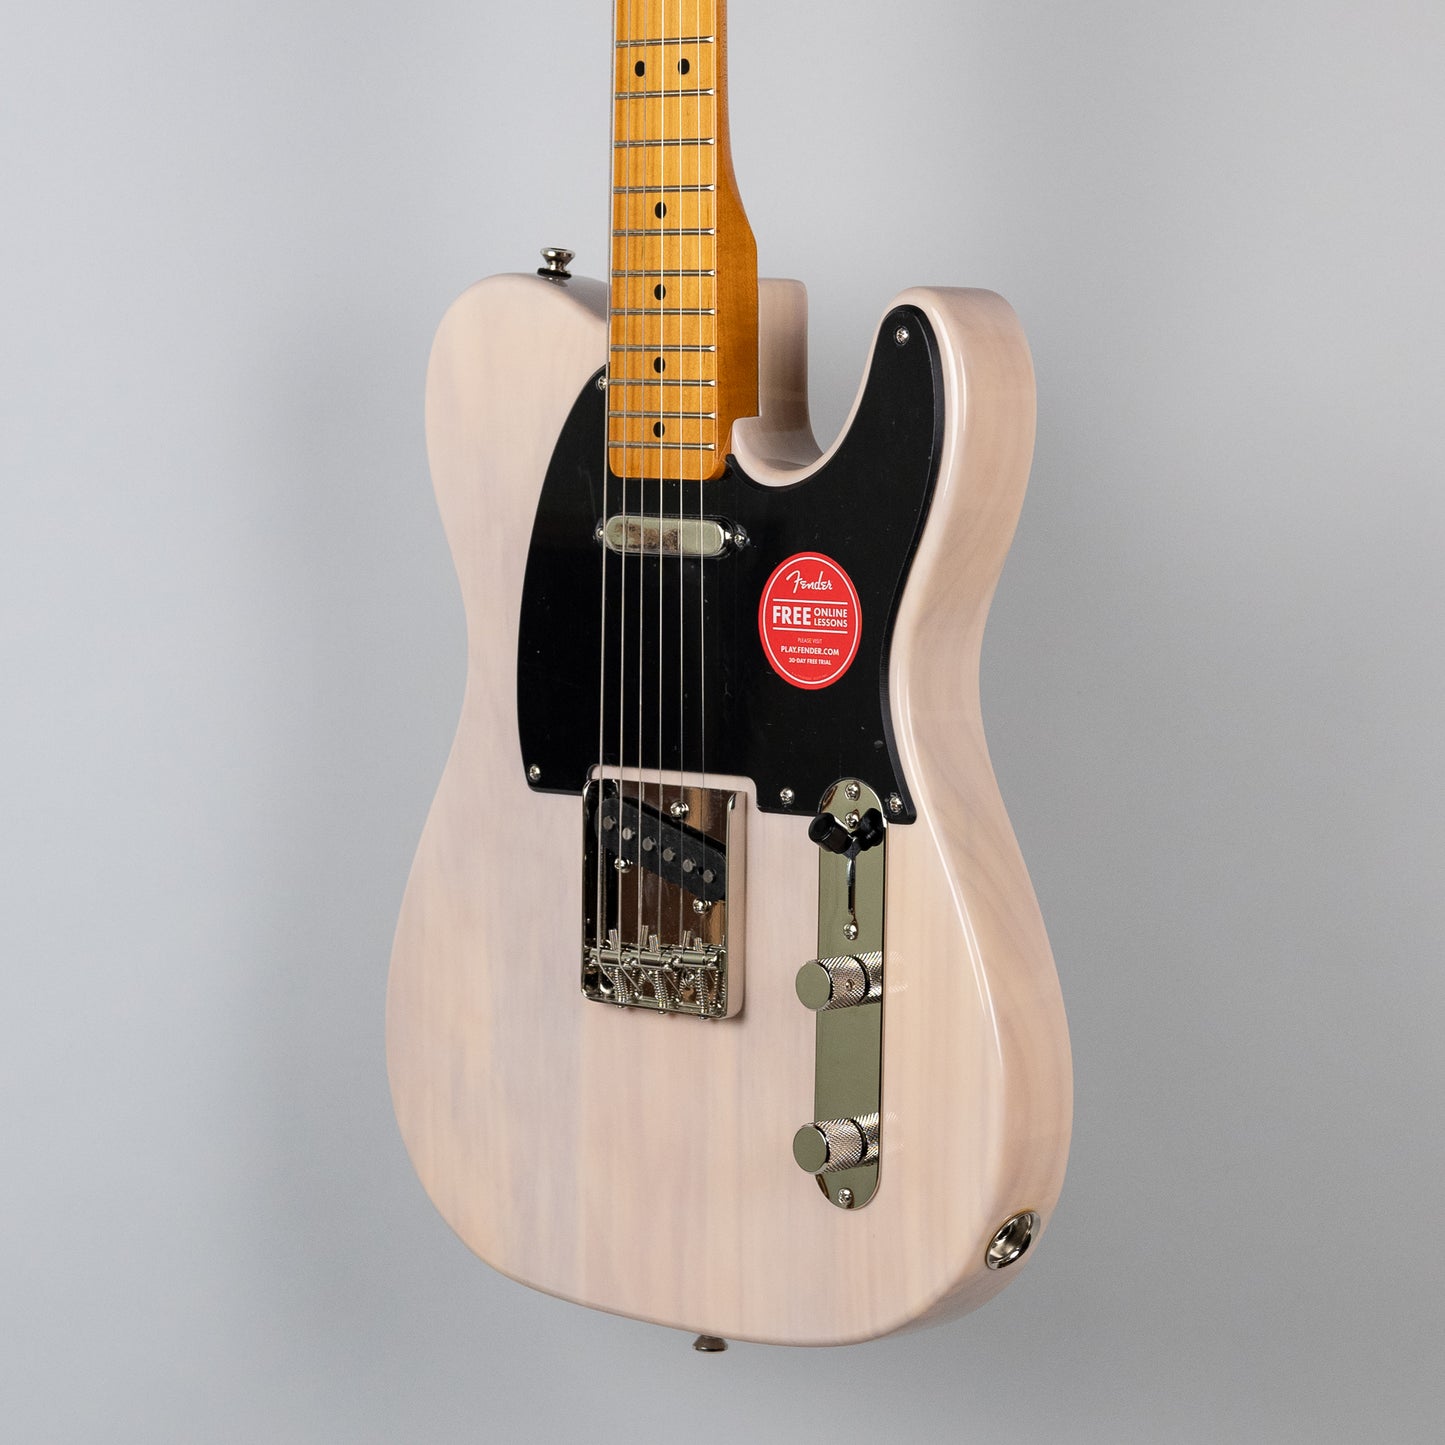 Squier Classic Vibe '50s Telecaster in White Blonde